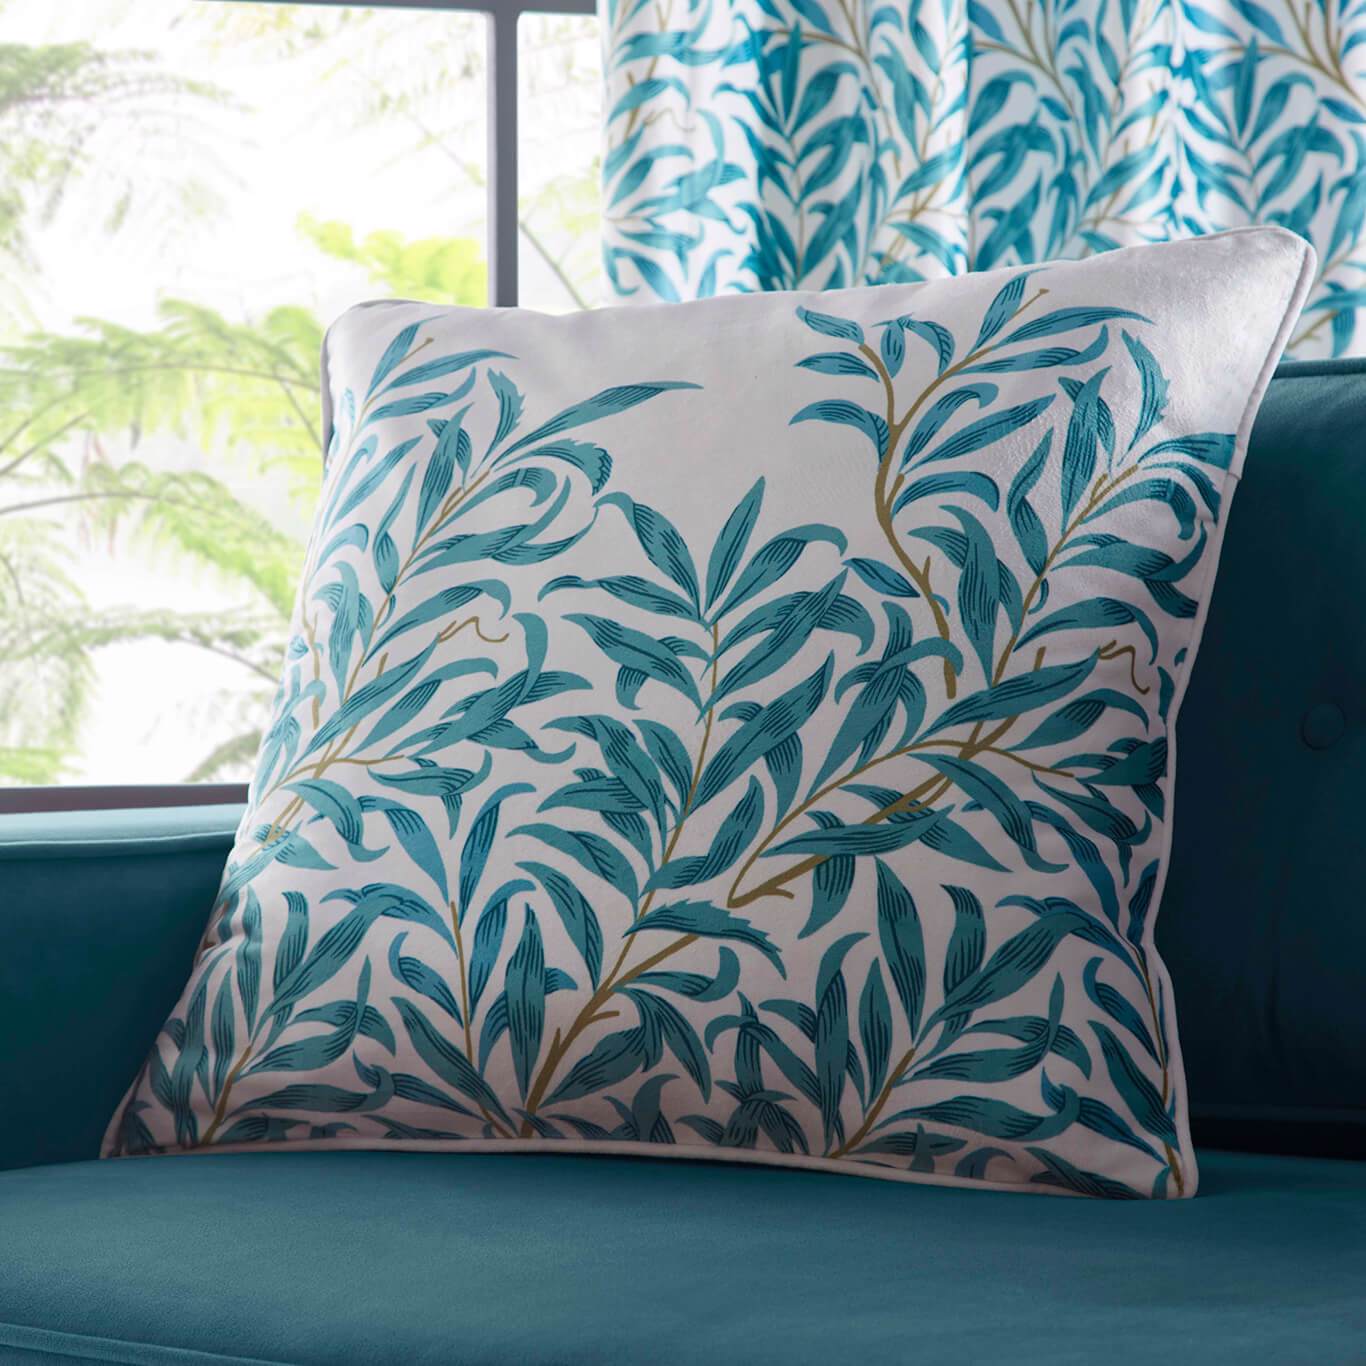 Willow Boughs Cushion Teal Cushions by CNC